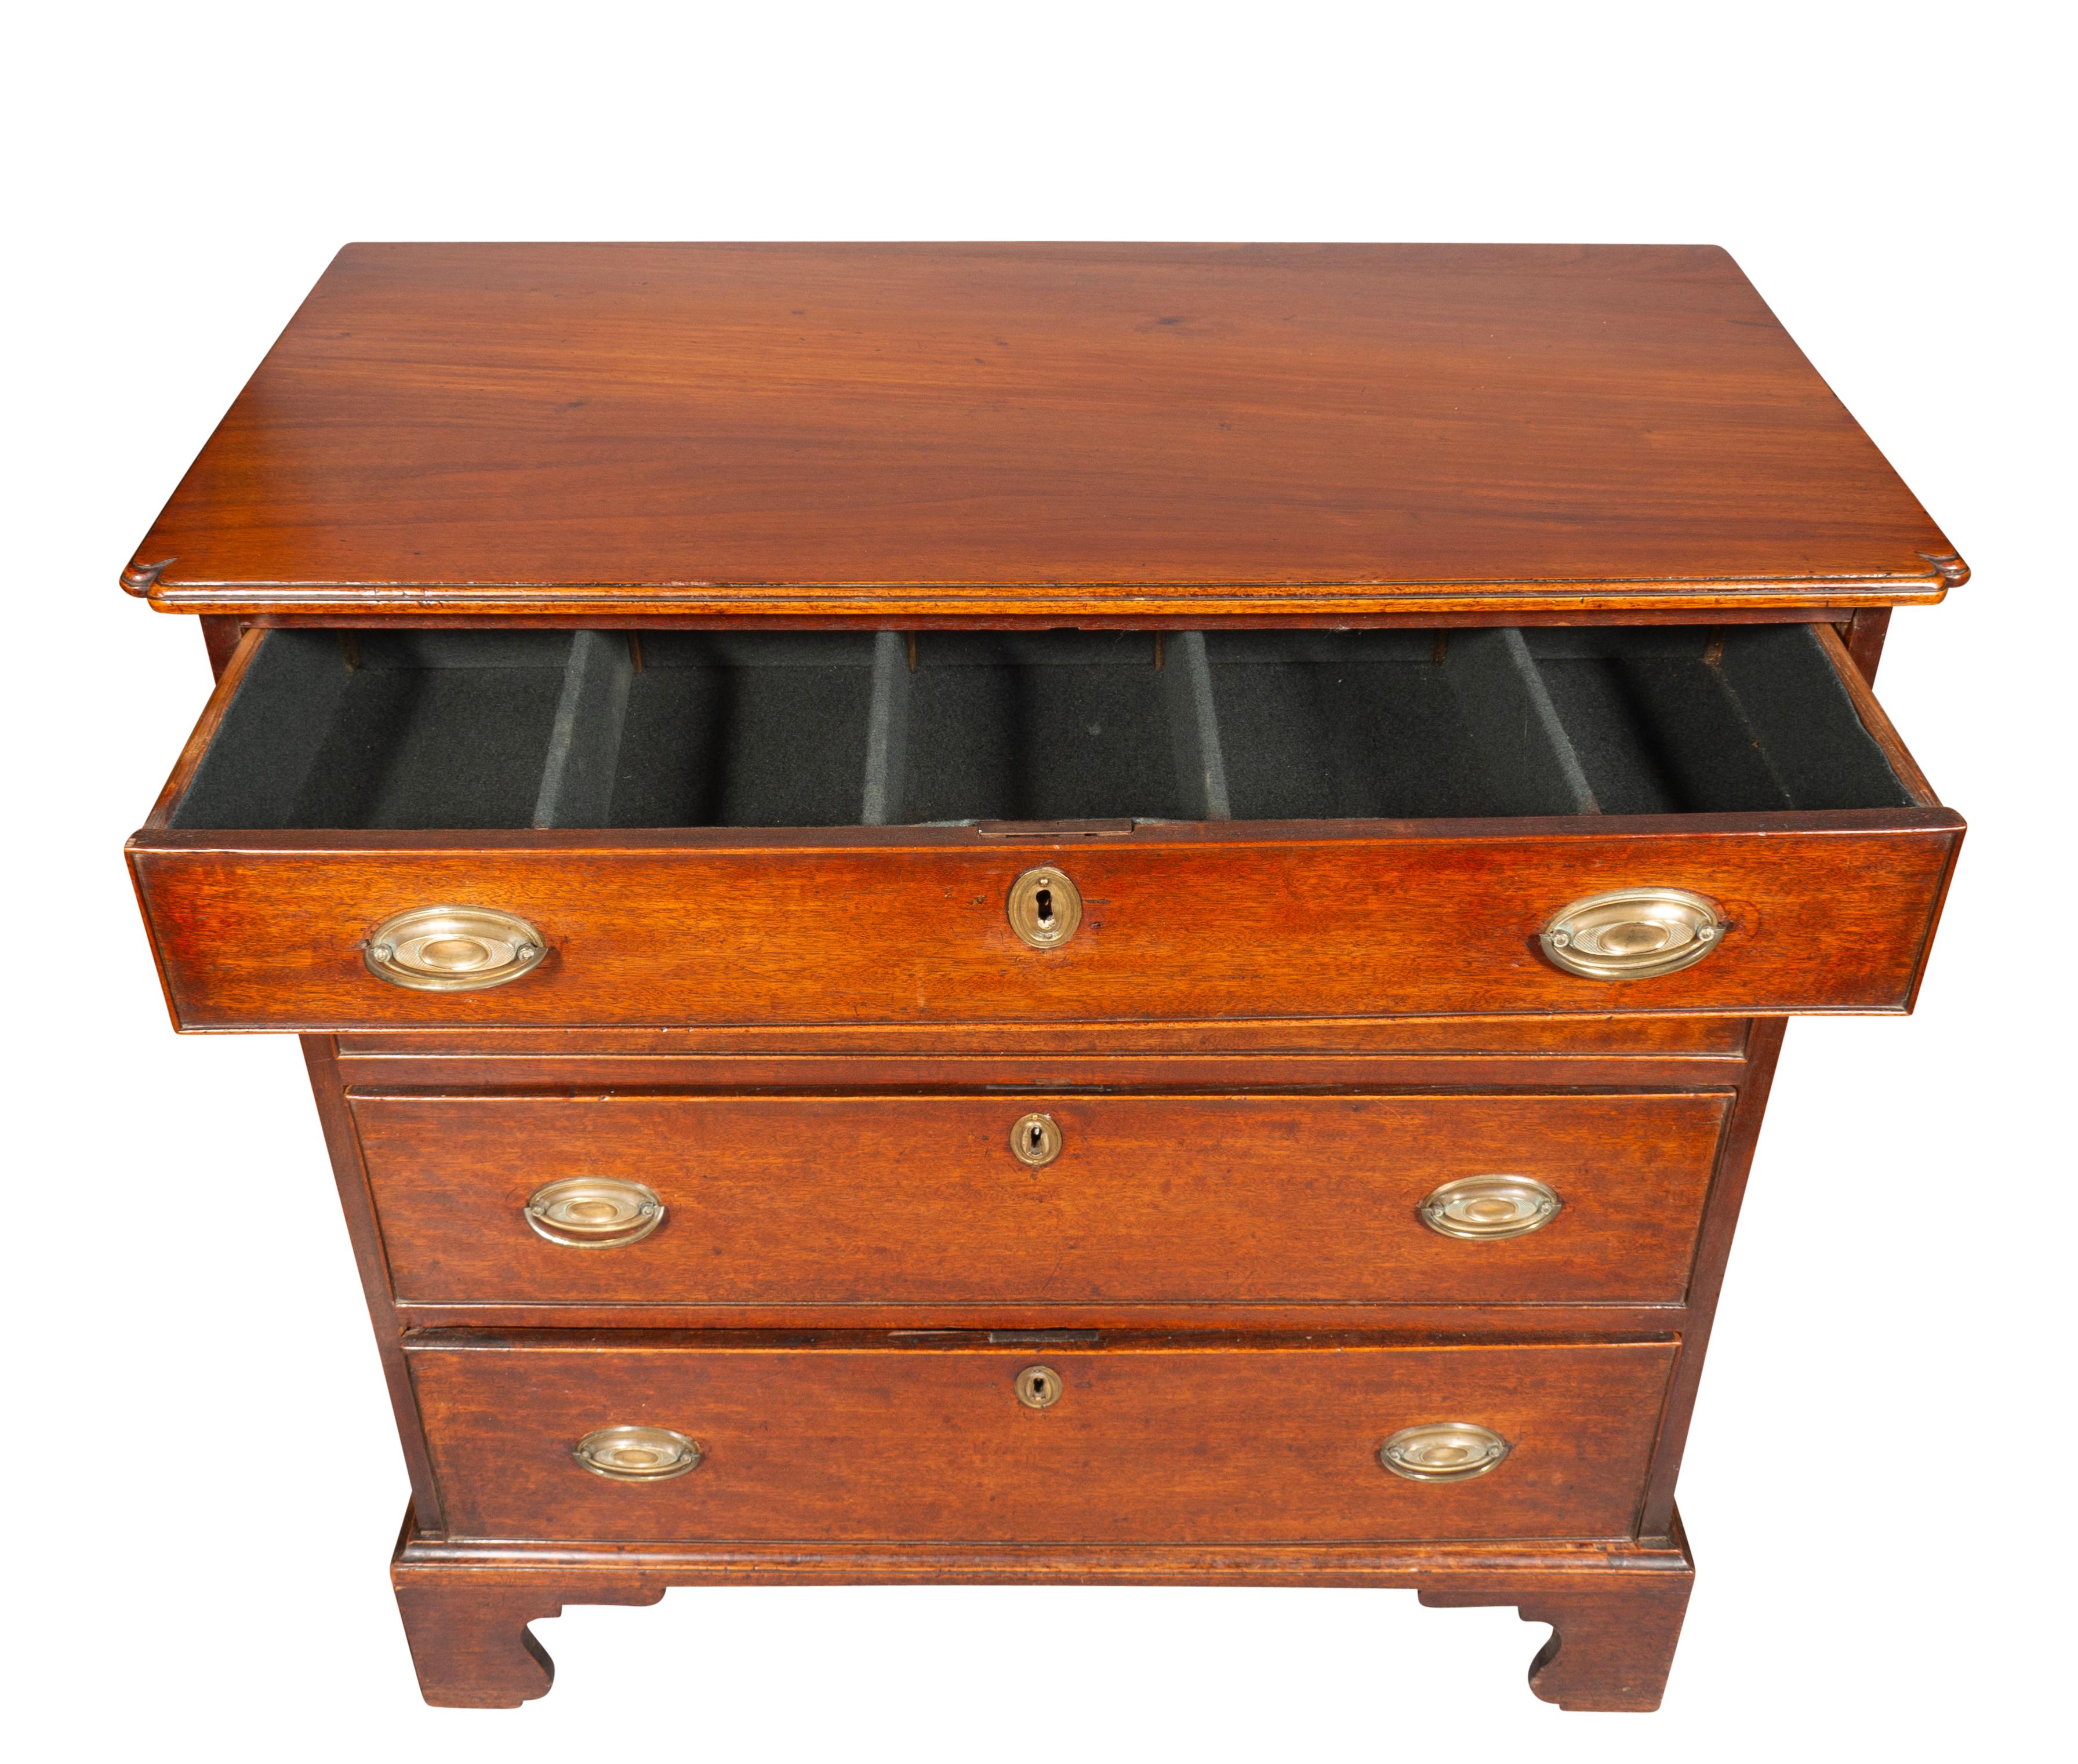 Late 18th Century American Federal Mahogany Chest Of Drawers